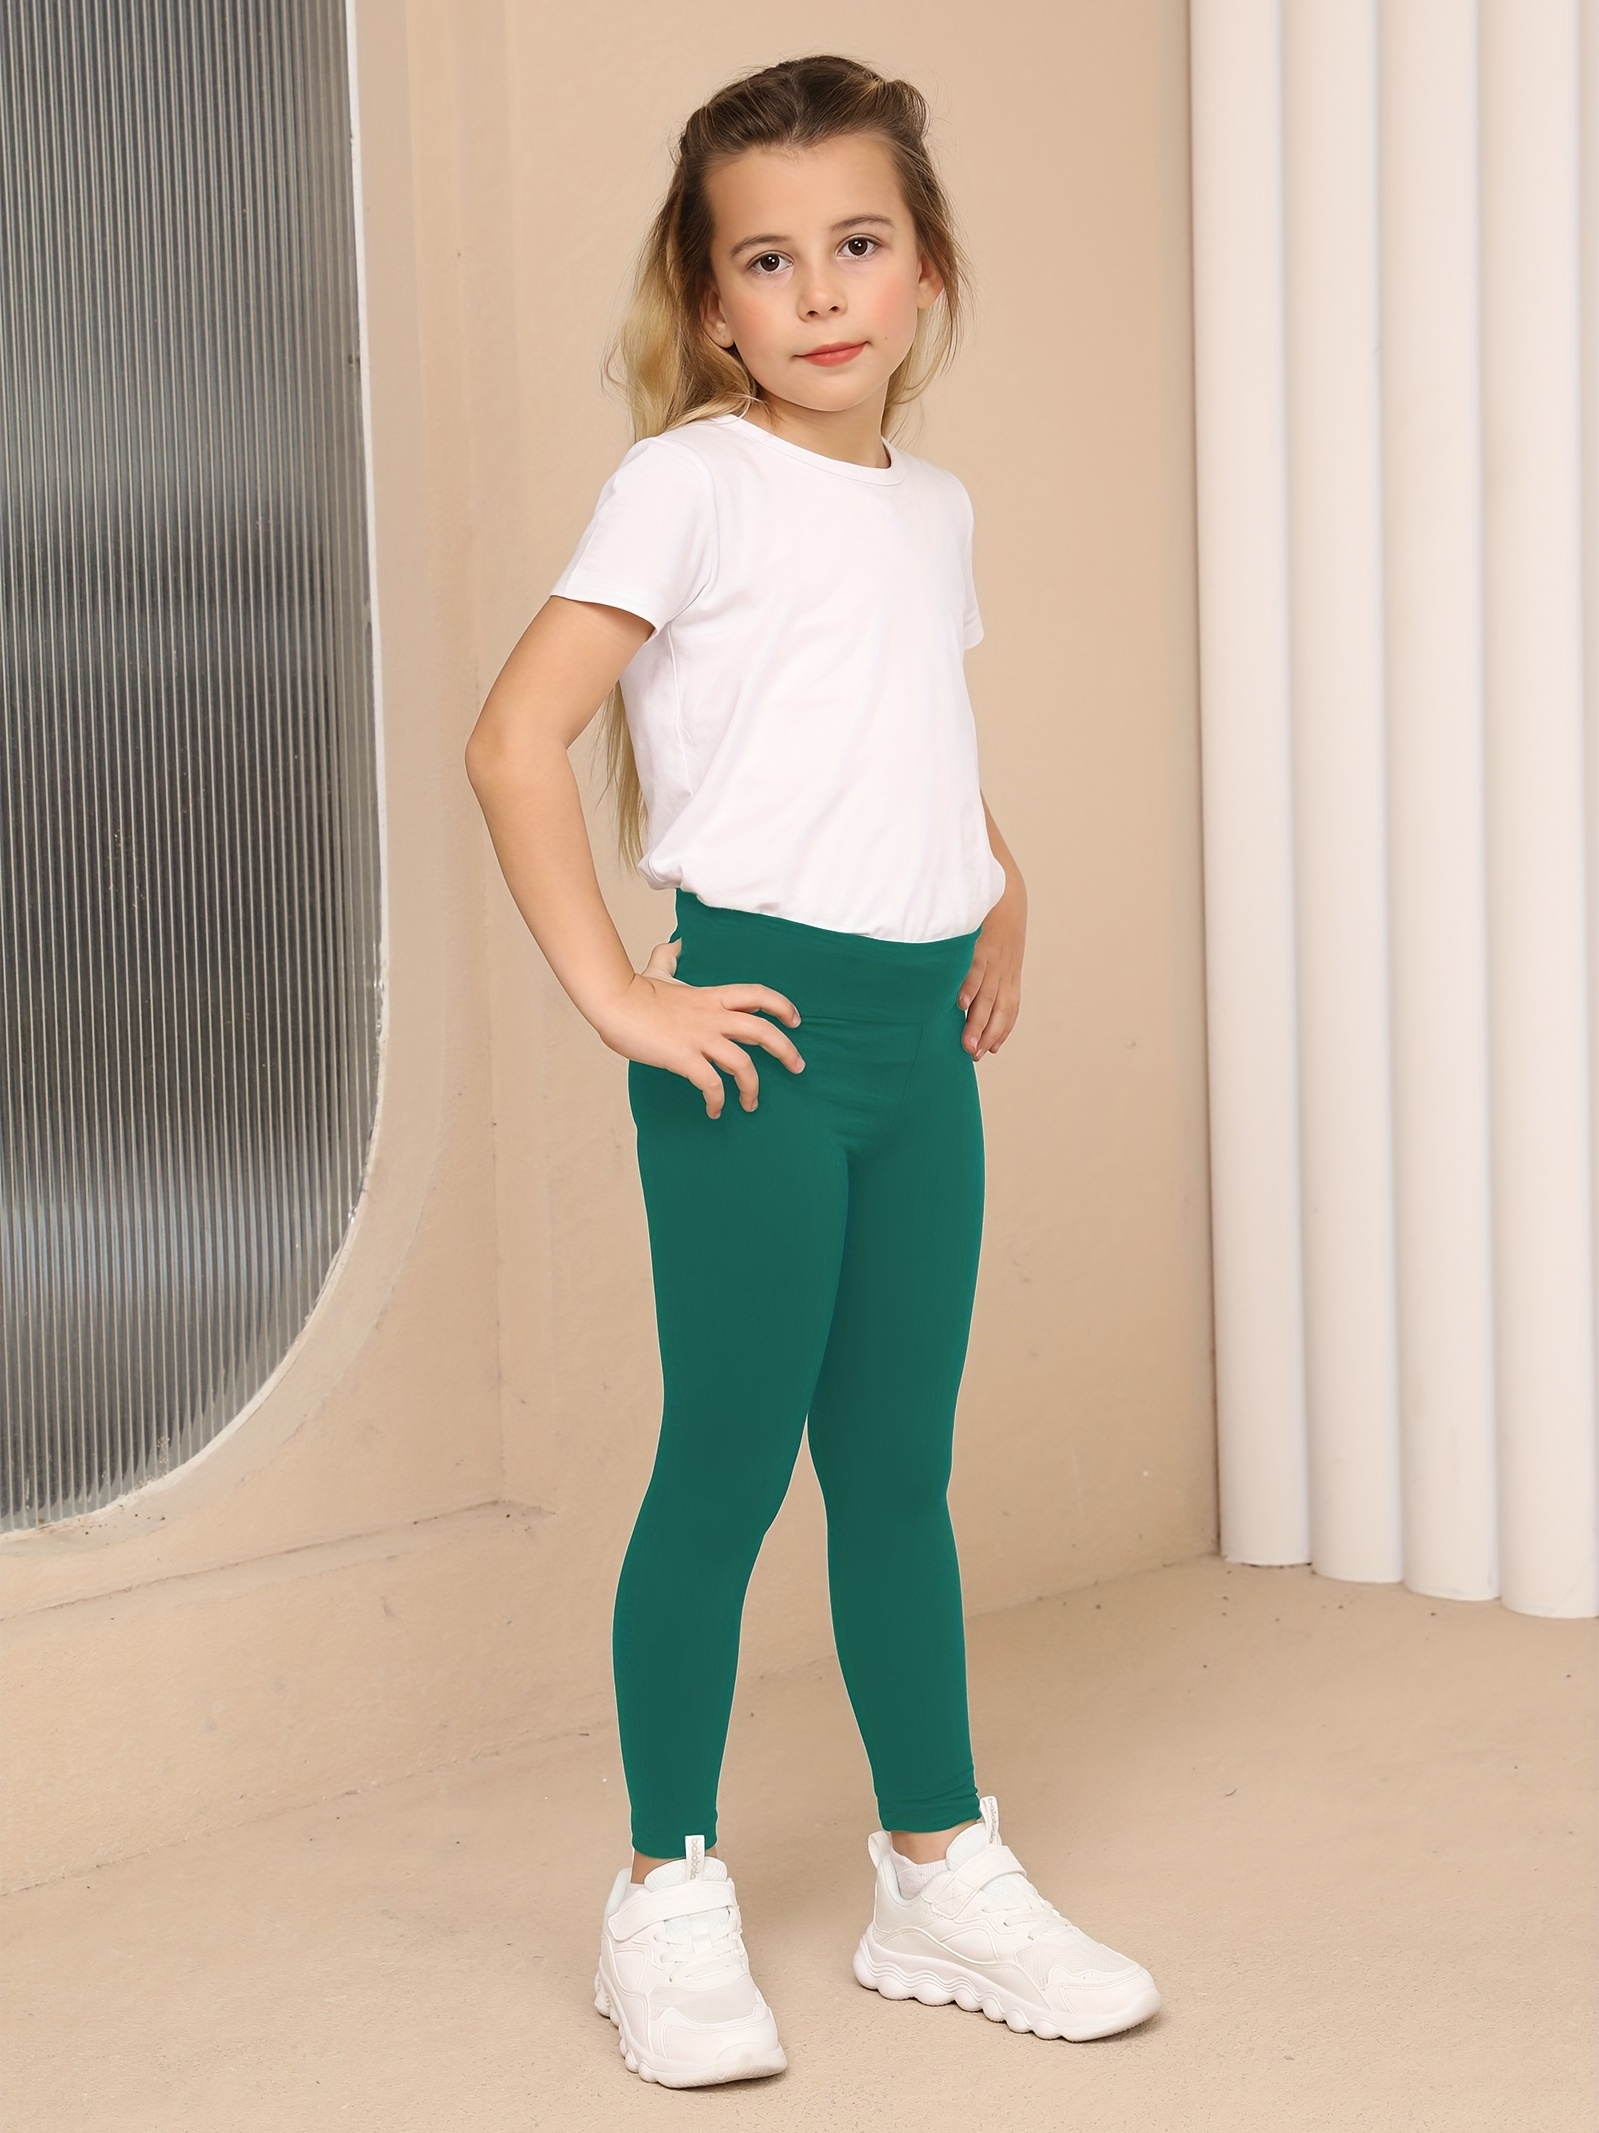 Spring Kids Solid Leggings Girls Thin Ankle Length Tights Pants 2+